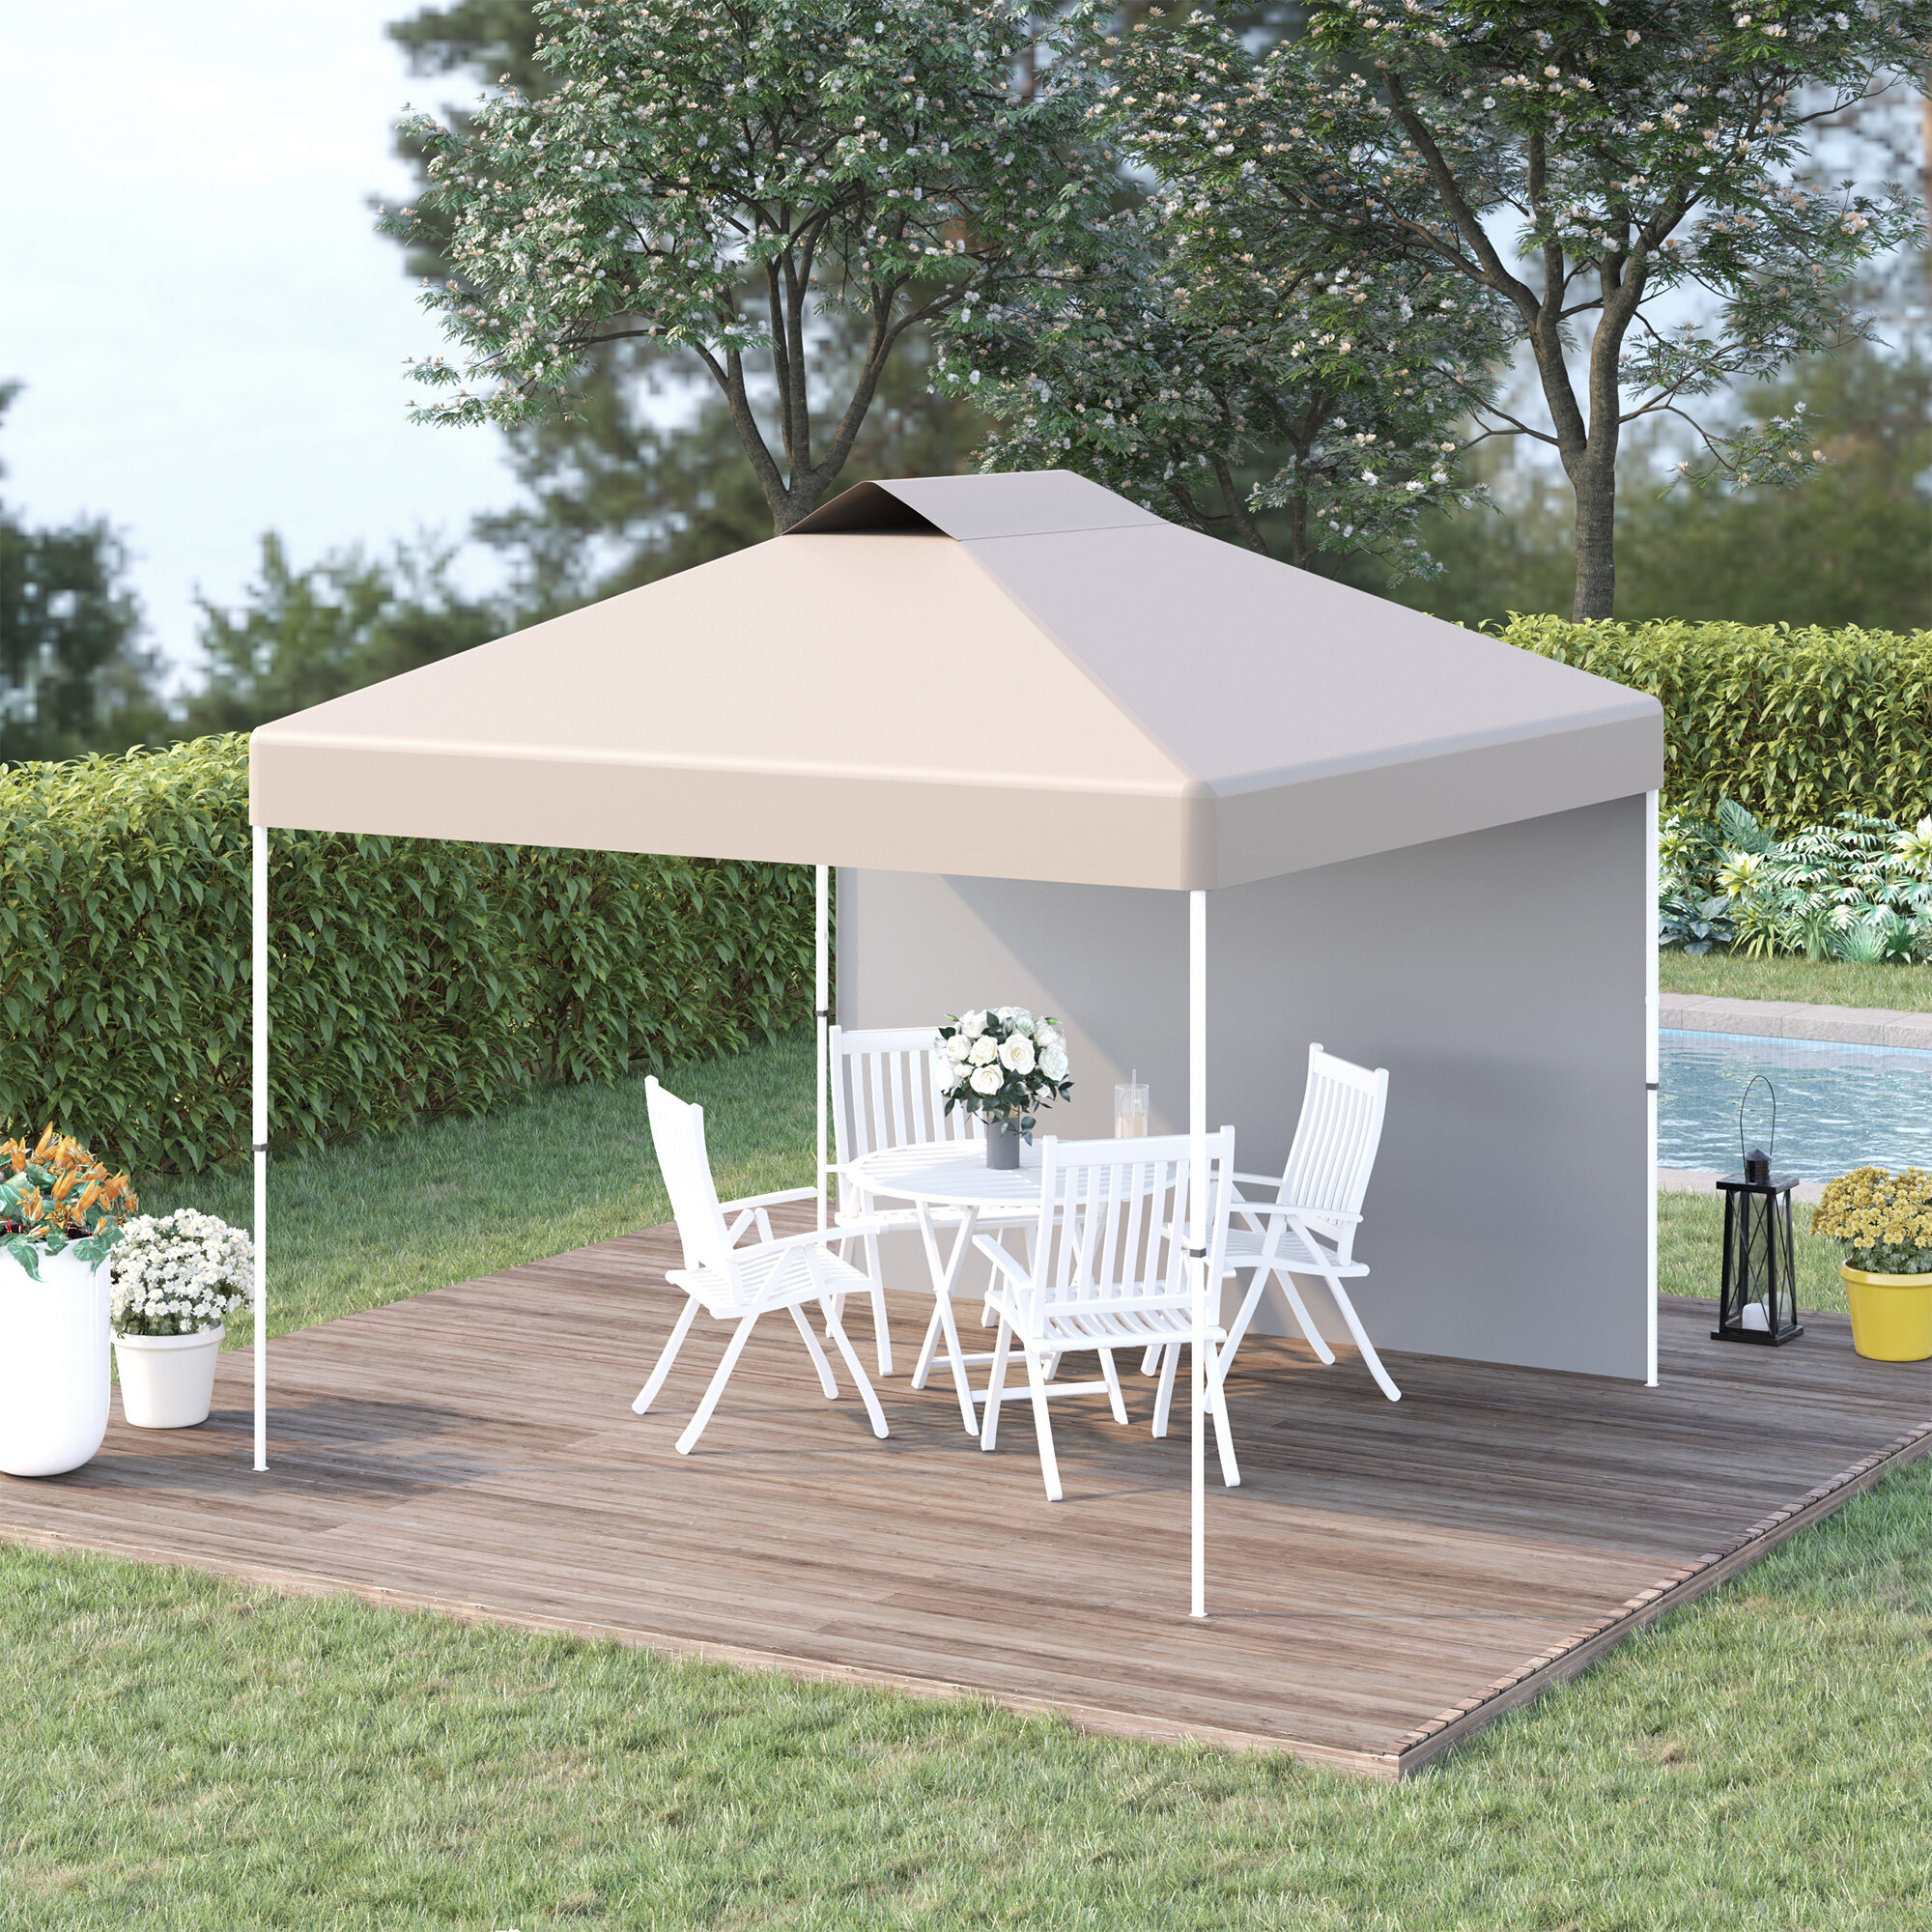 Outsunny 10' x 10' Outdoor Pop-Up Party Tent Canopy with Top Vent